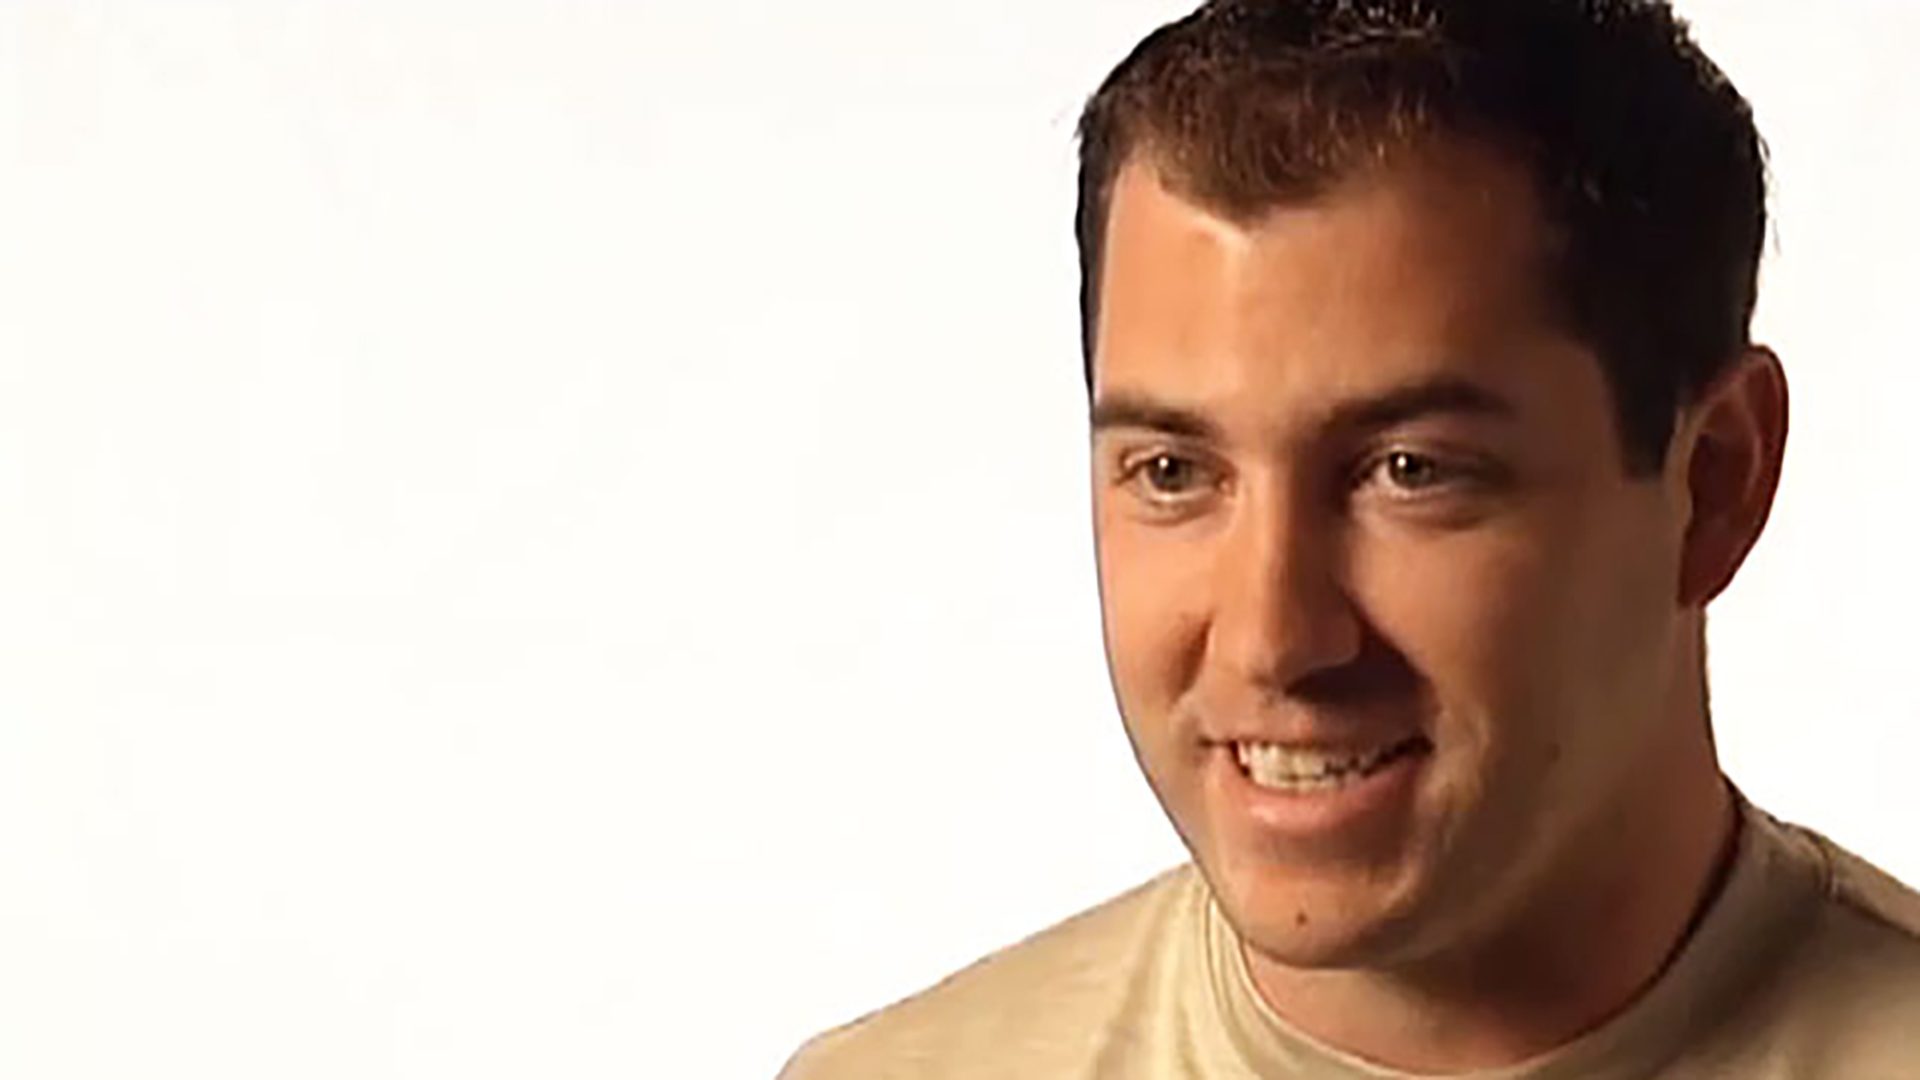 A smiling young adult man wearing a cream colored shirt is interviewed against a white background.